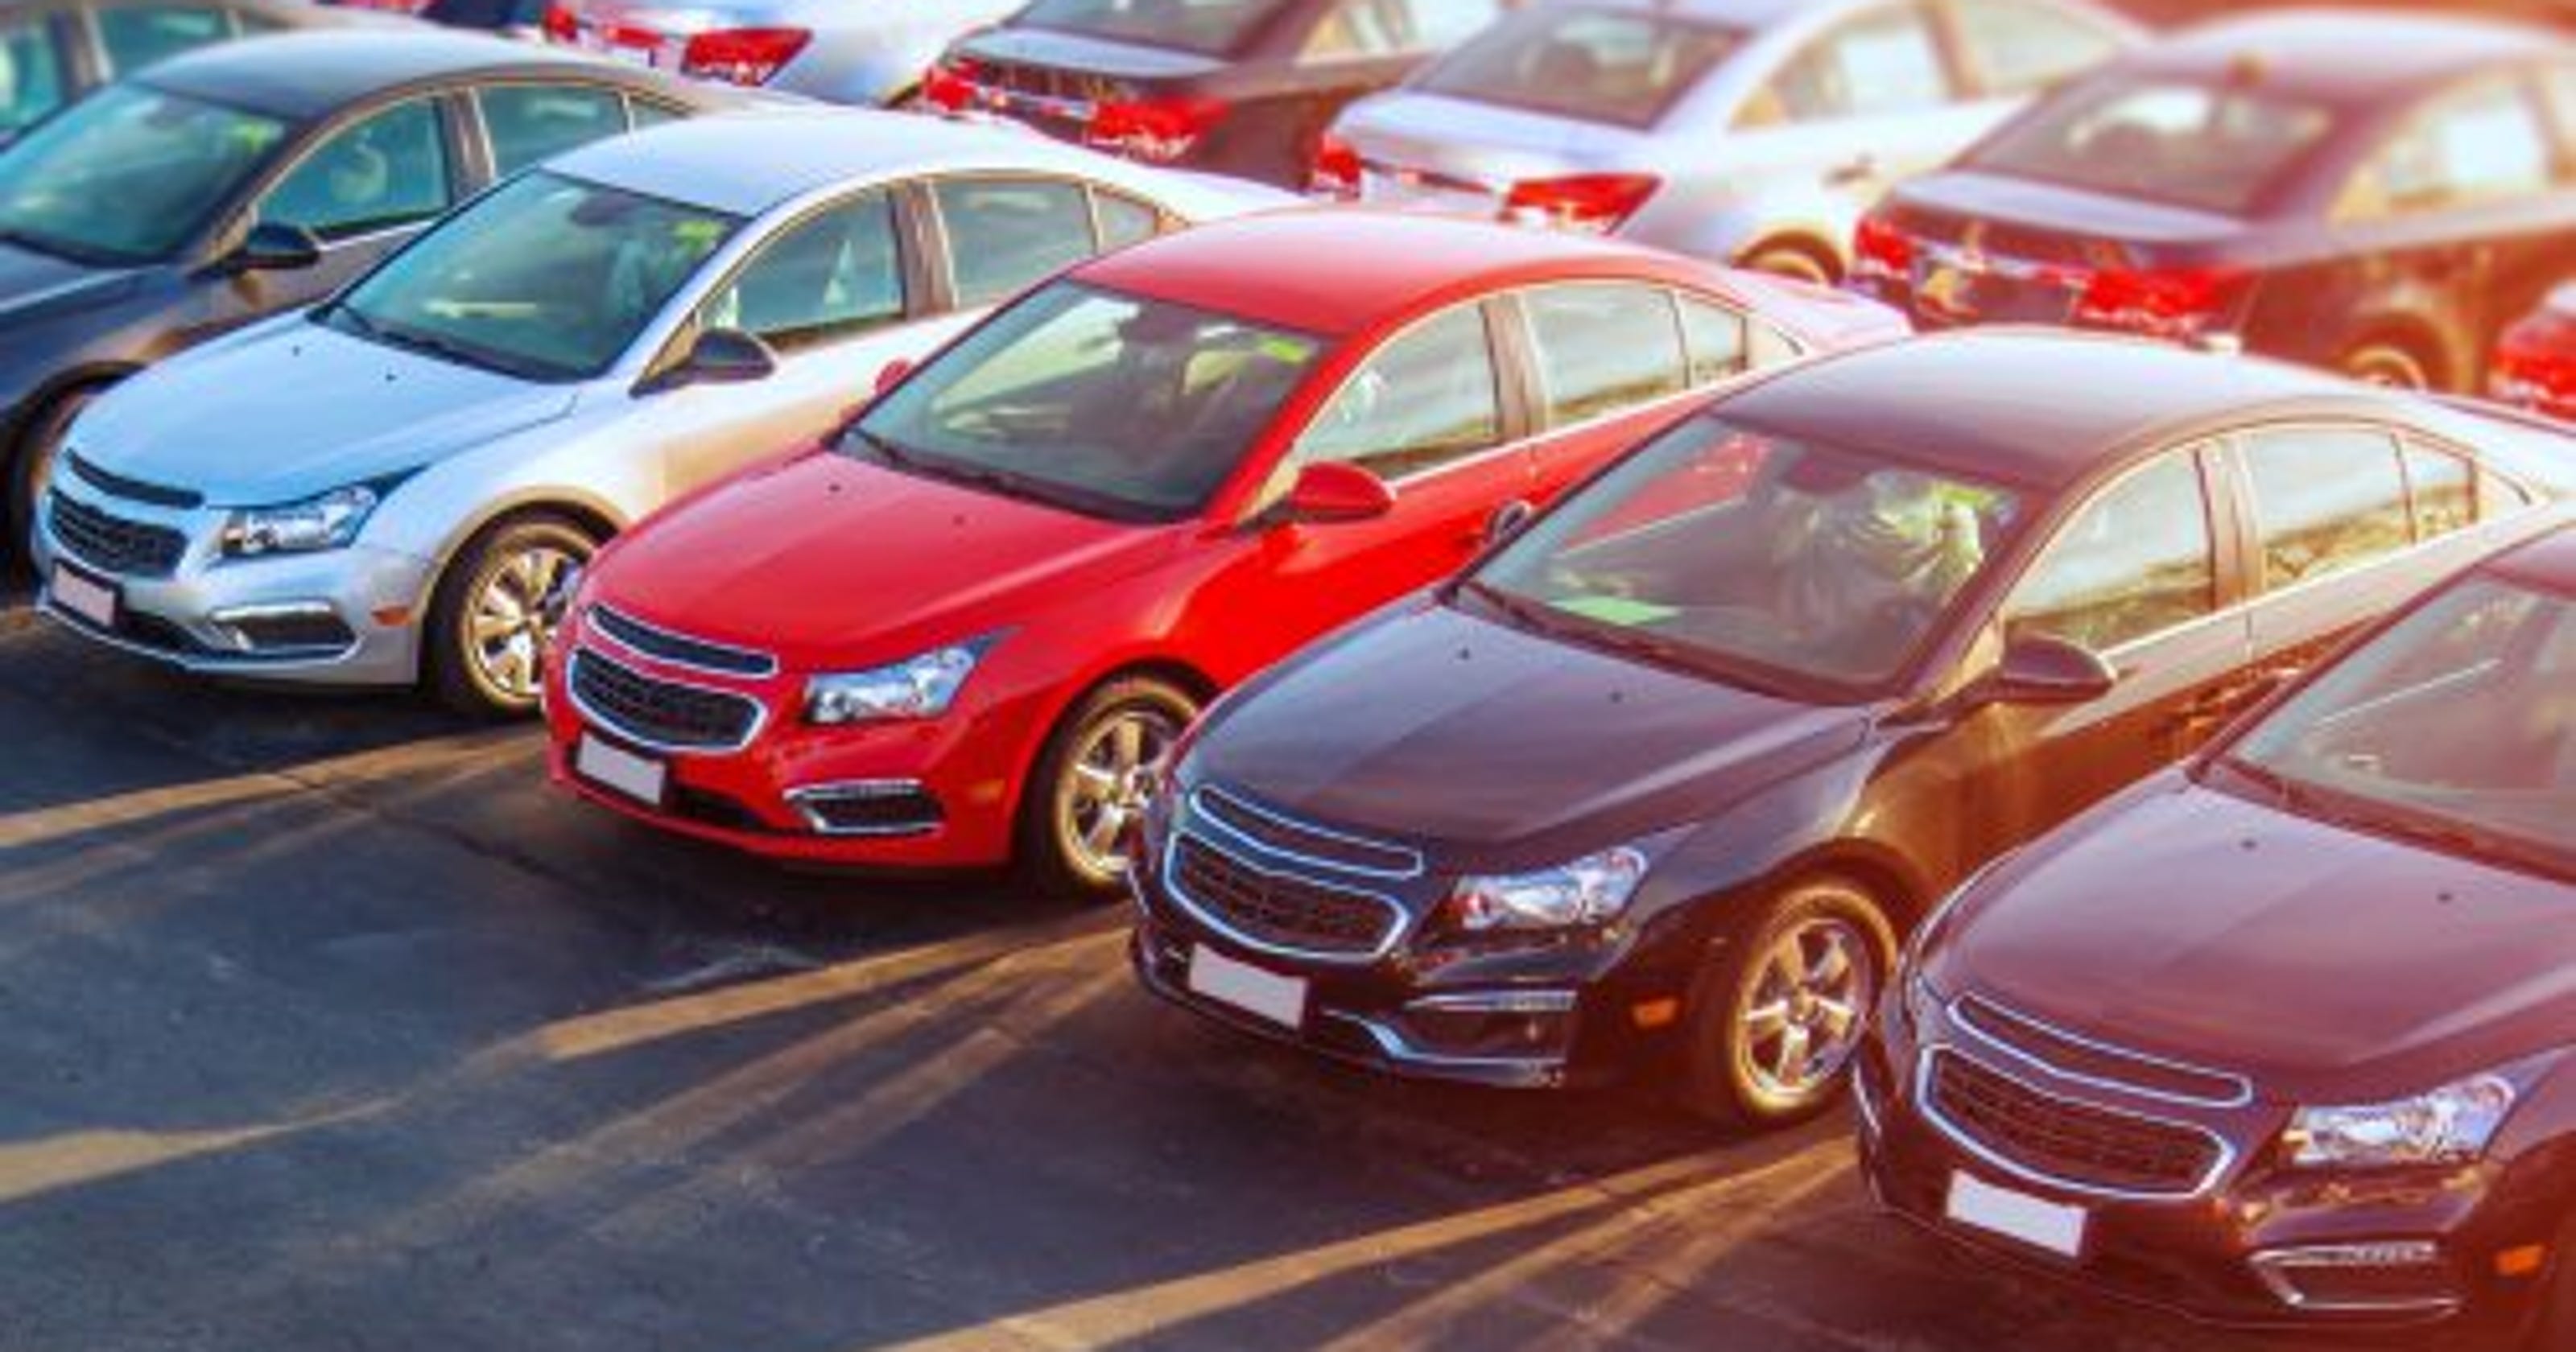 Used-car prices hit record high